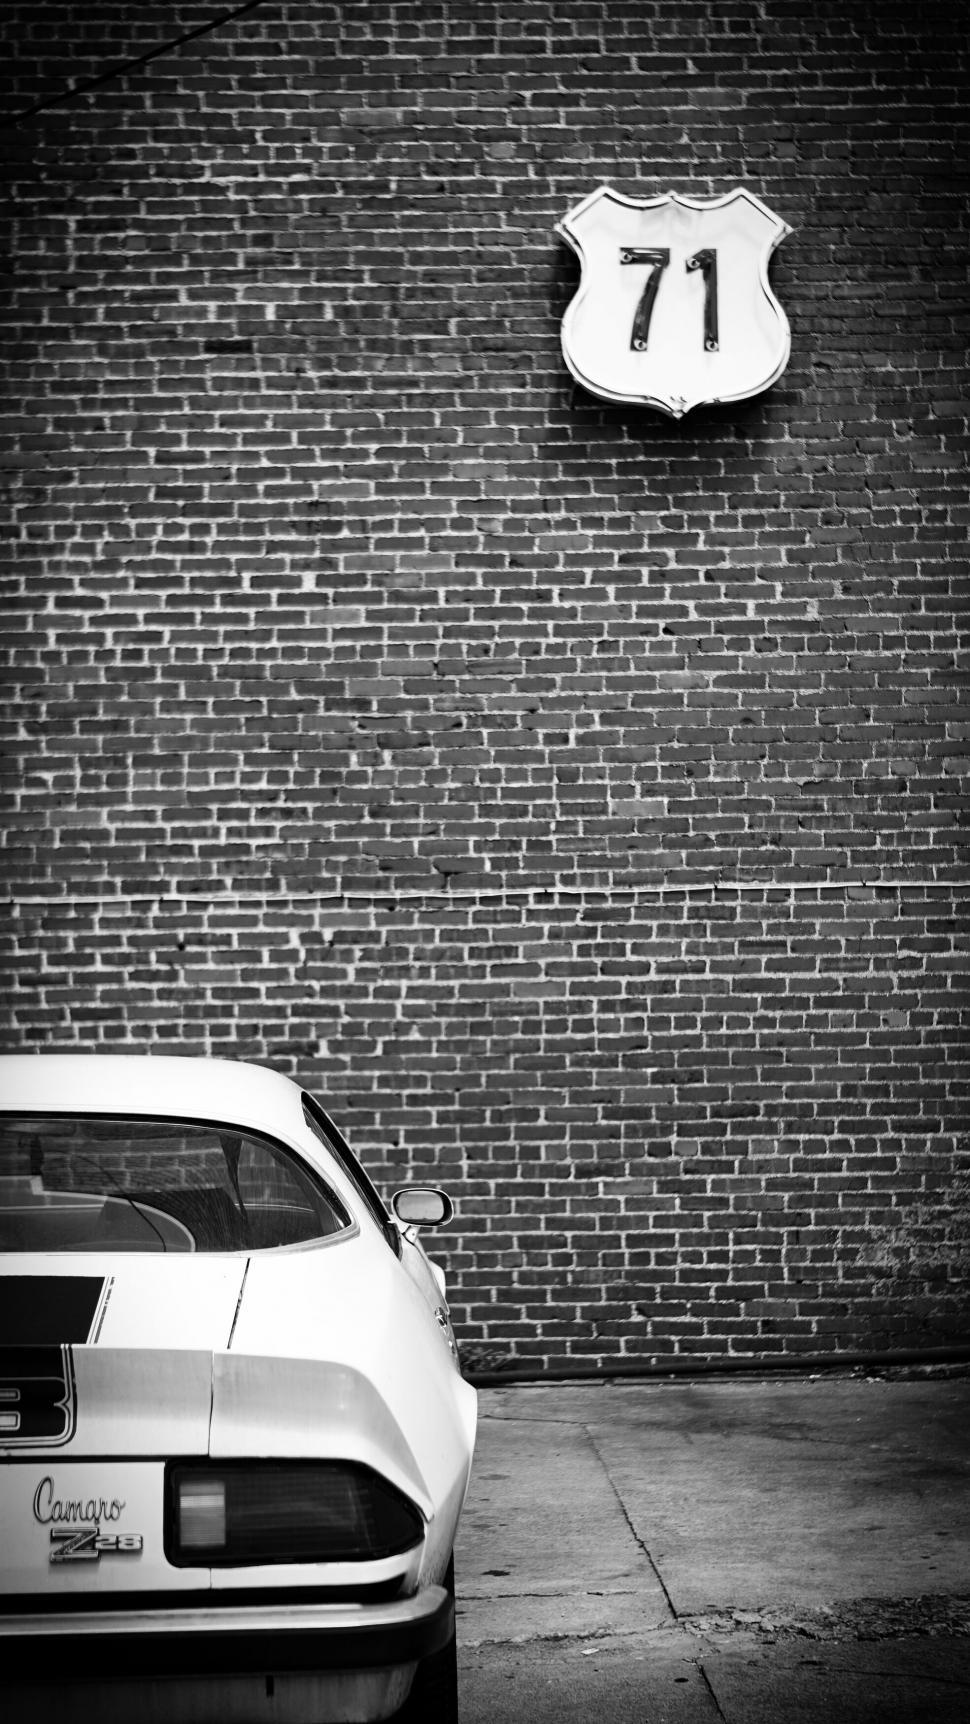 Free Image of Vintage Camaro by a brick wall with a 71 sign 